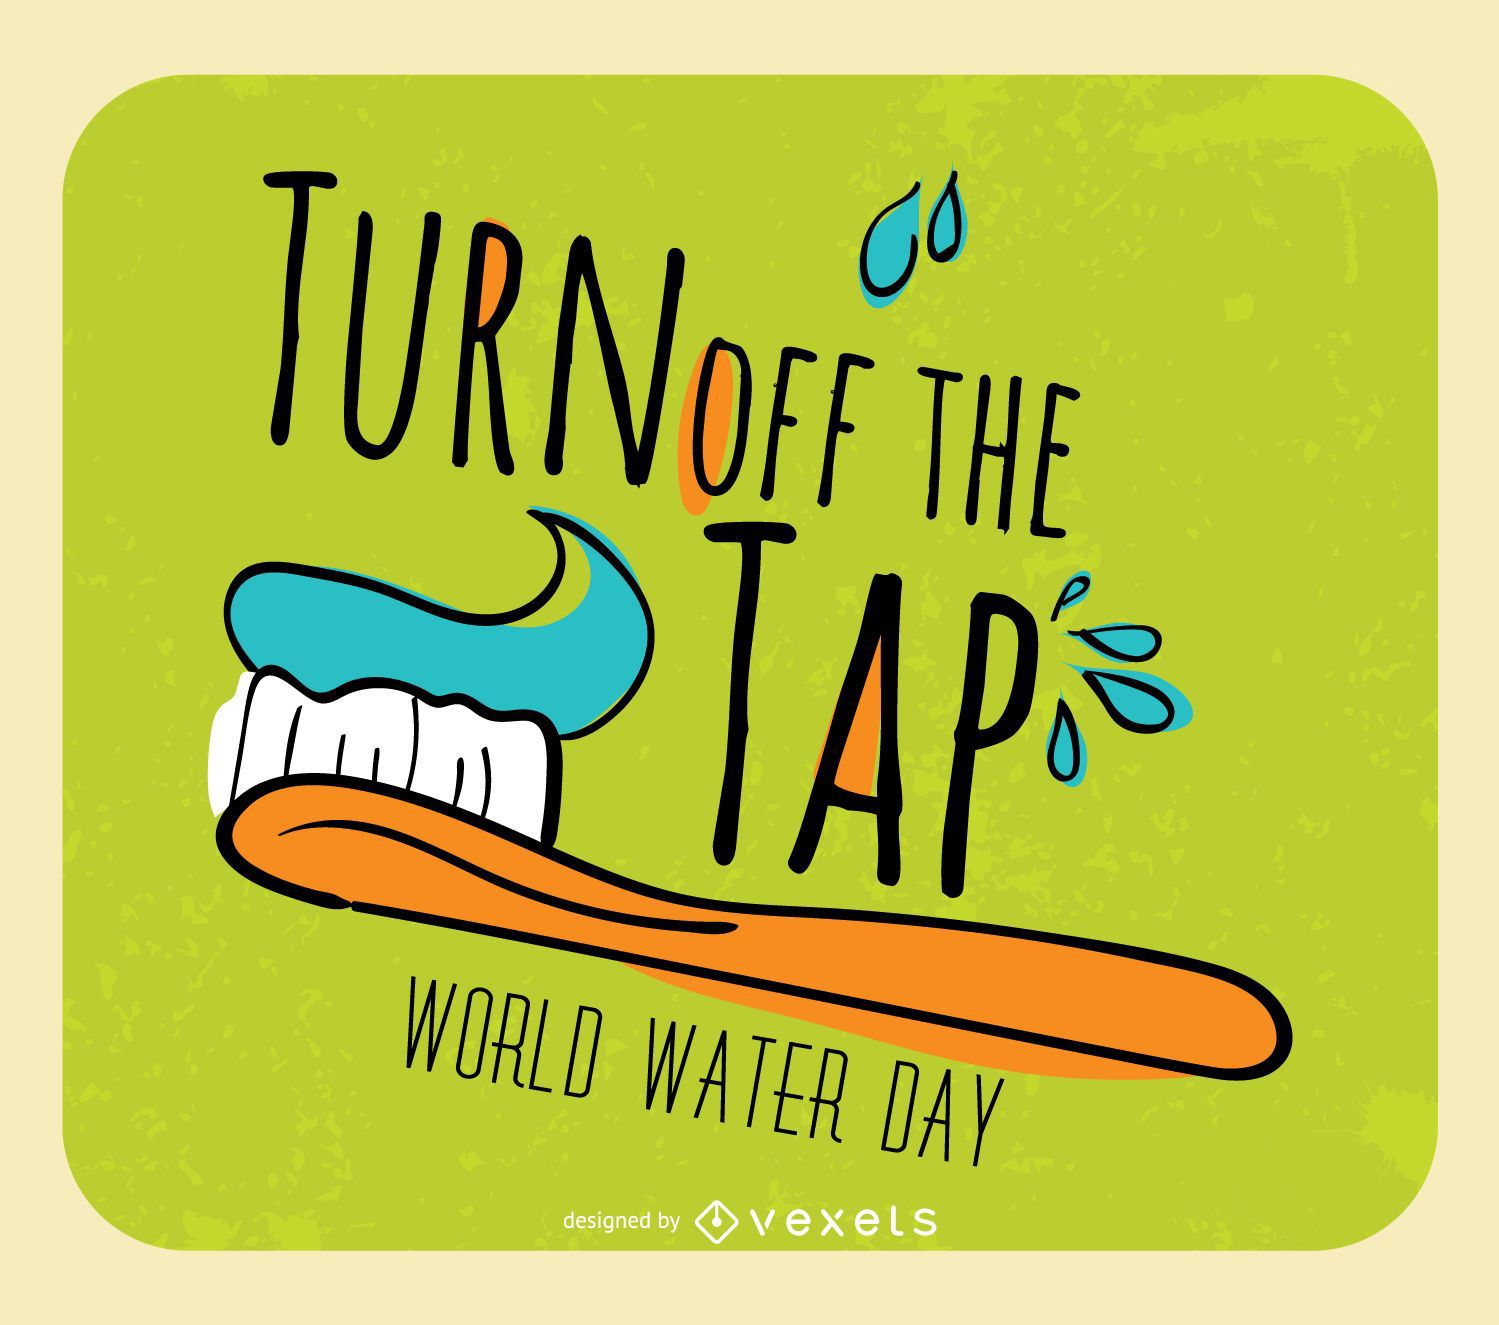 World Water Day - Turn off the tap